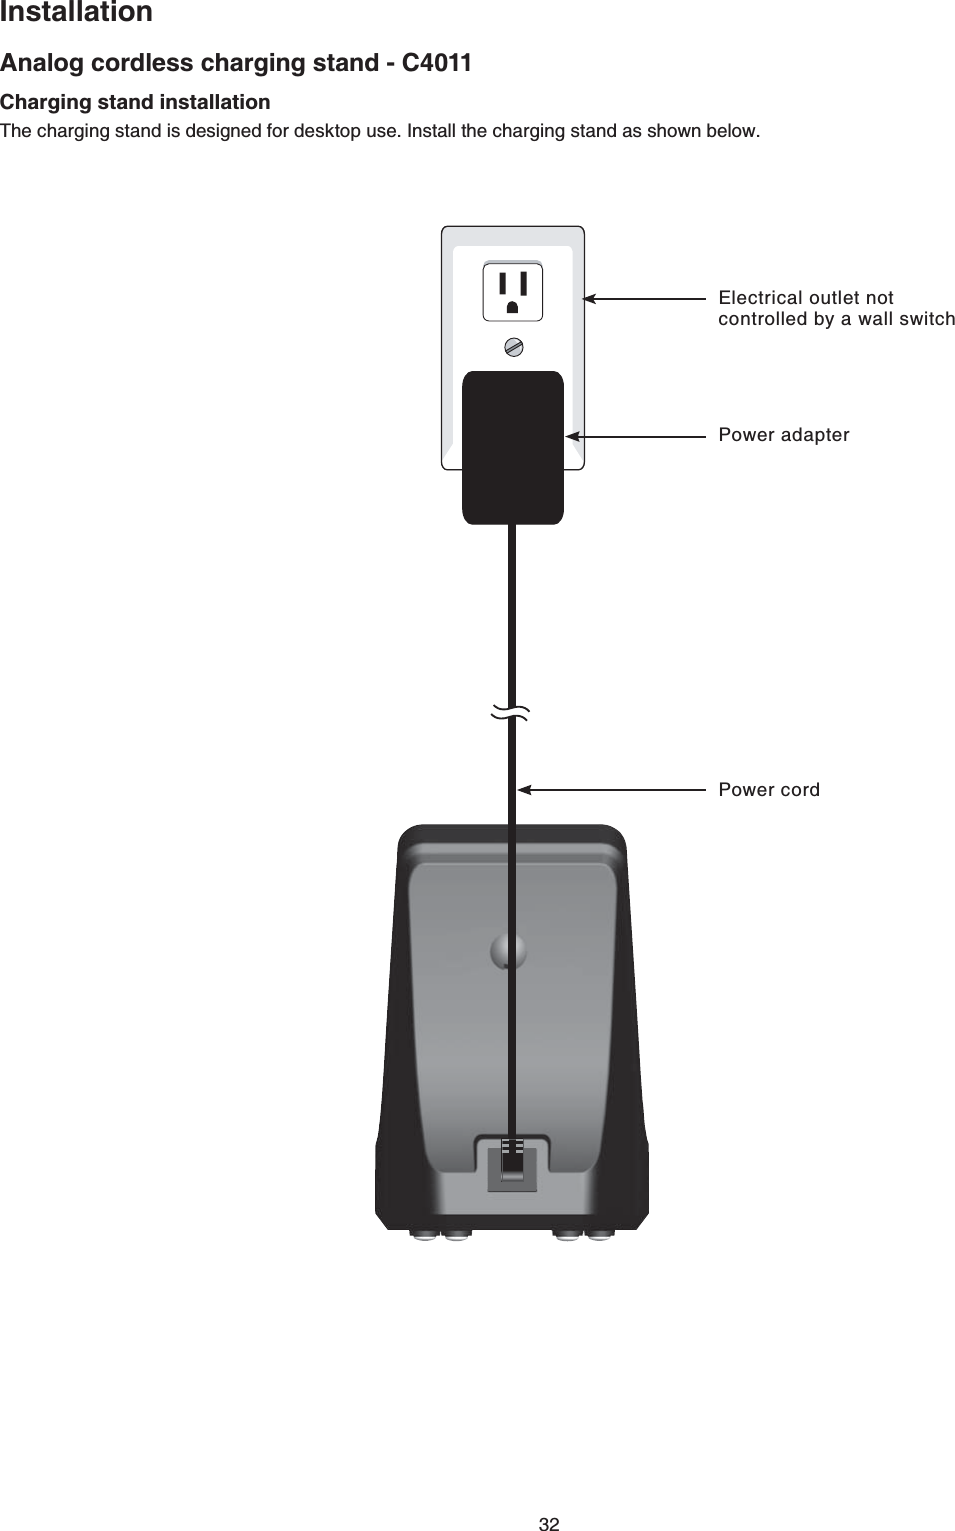 32Analog cordless charging stand - C4011InstallationCharging stand installationThe charging stand is designed for desktop use. Install the charging stand as shown below.Power adapterElectrical outlet not controlled by a wall switchPower cord